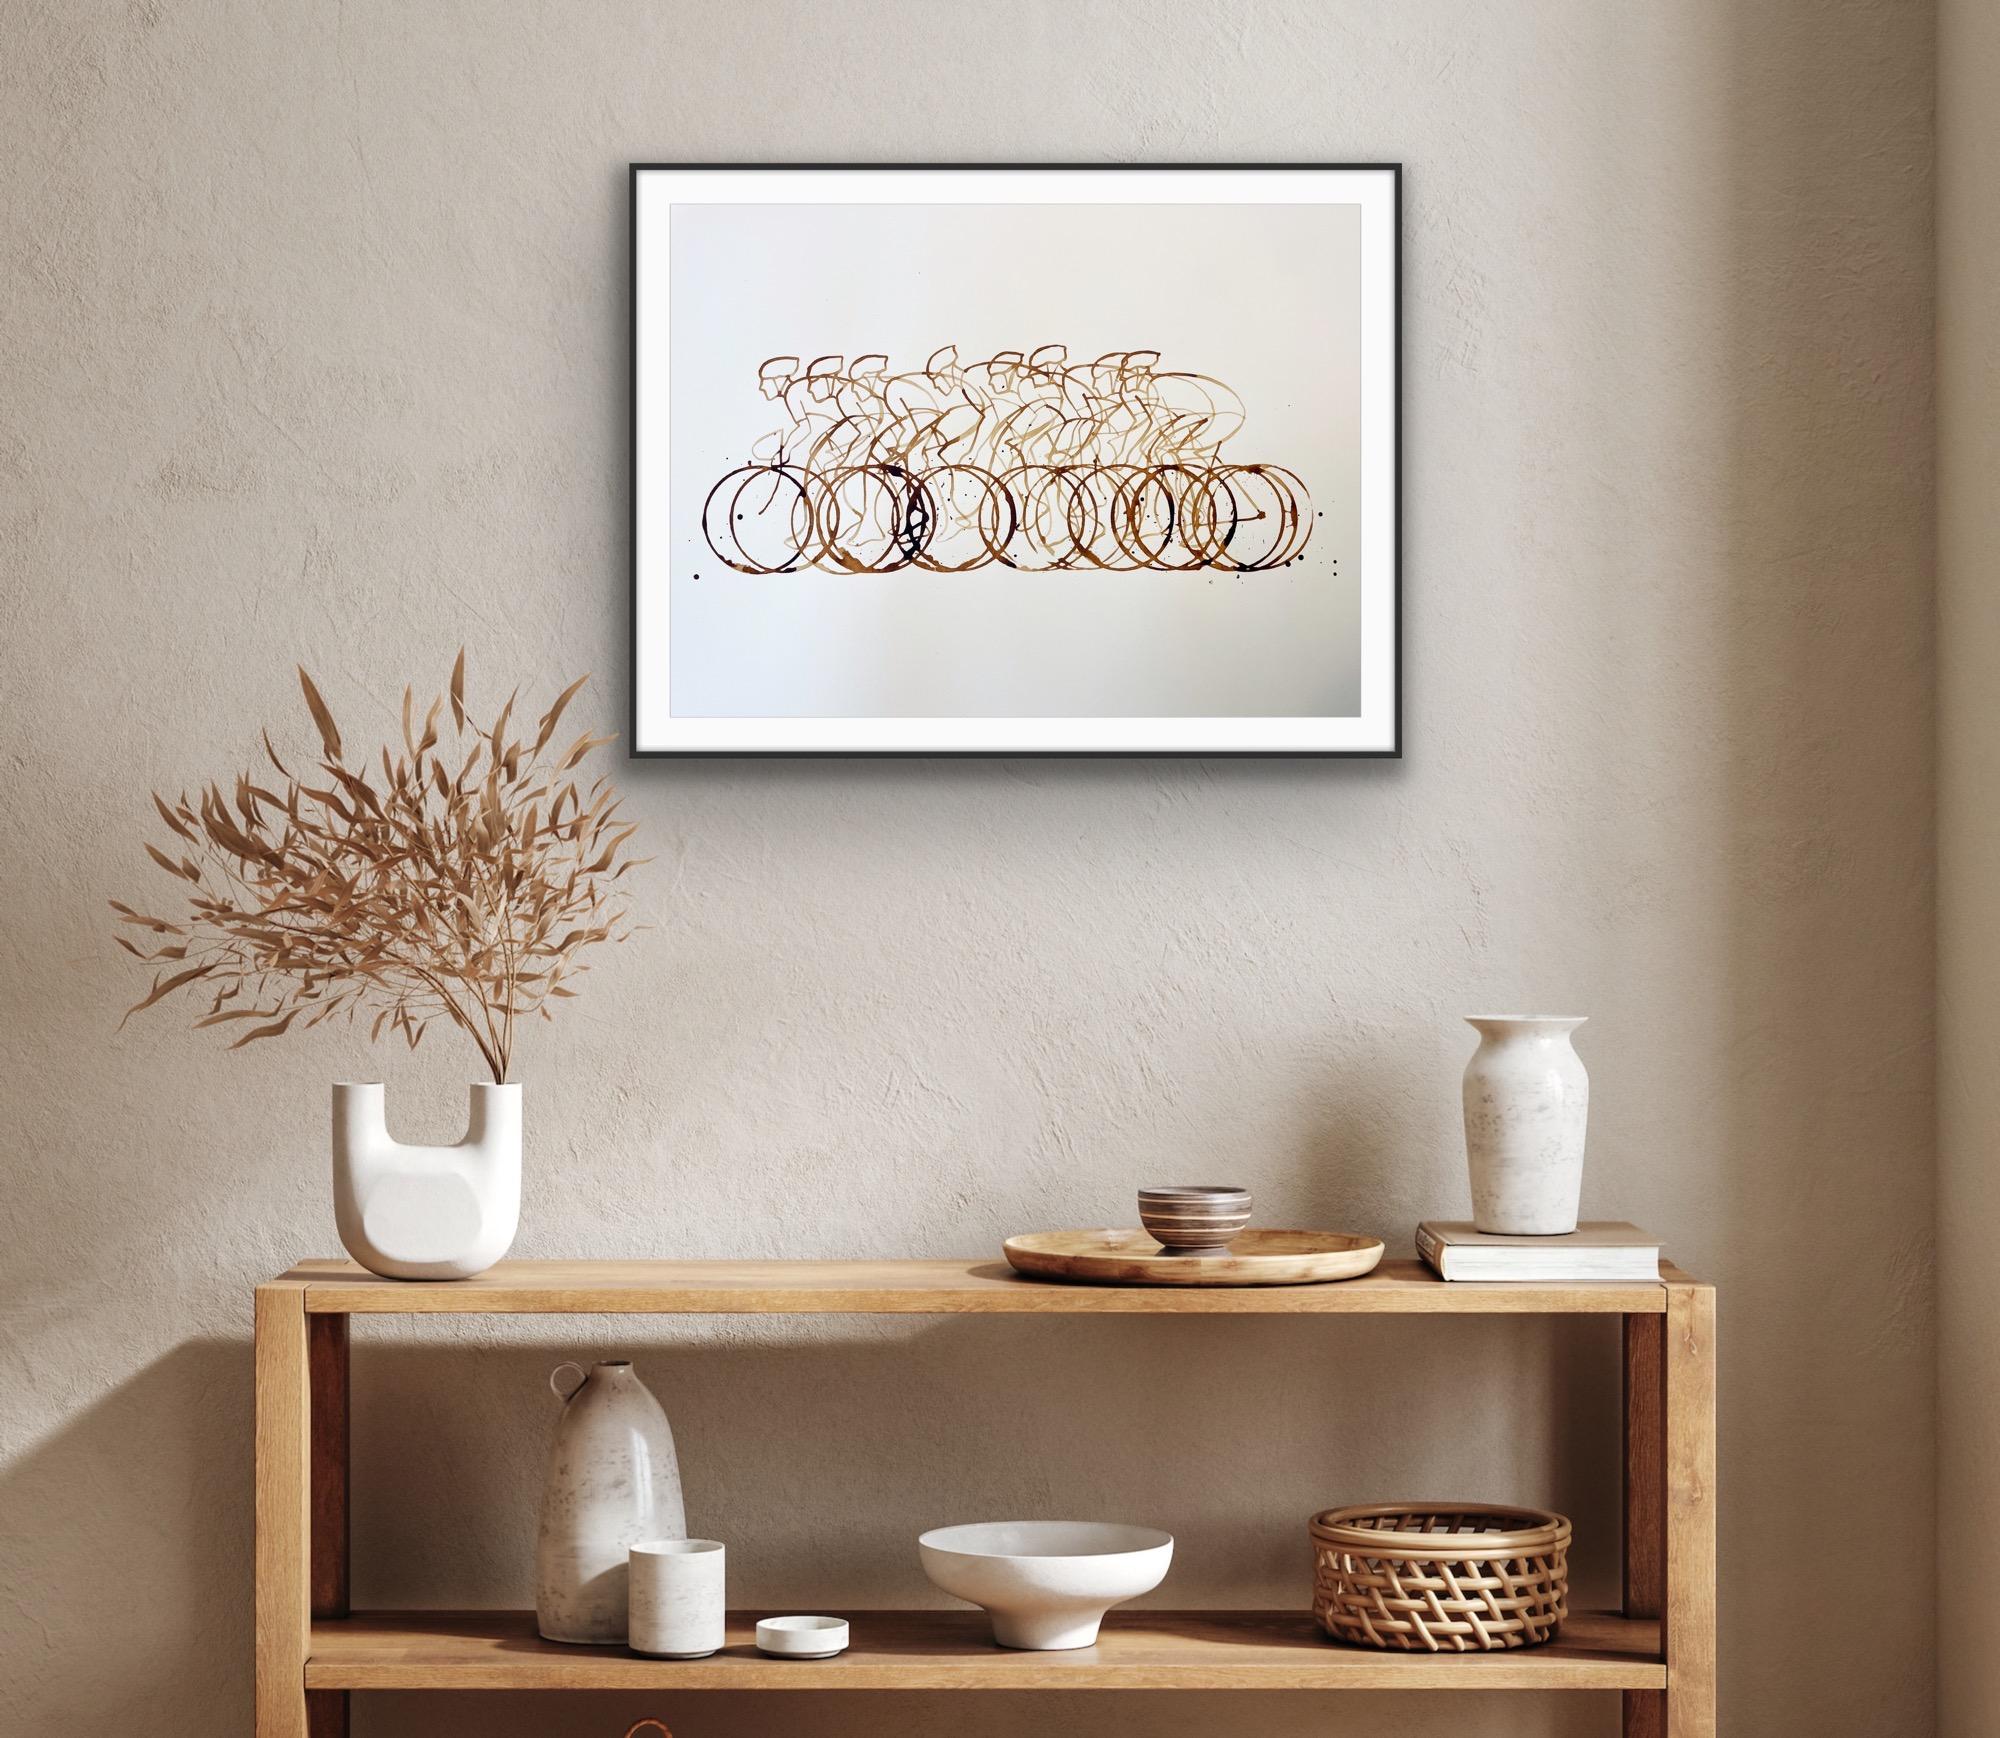 Coffee Peloton (CP01_nov23)
Eliza Southwood
Original still-life painting
Coffee on paper 
Image Size: H 42cm x W 60m
Sheet/Canvas Size: H 42cm x W 60cm x D 1cm
Sold Unframed

Still-life work of a group of cyclists. Original Artwork made from